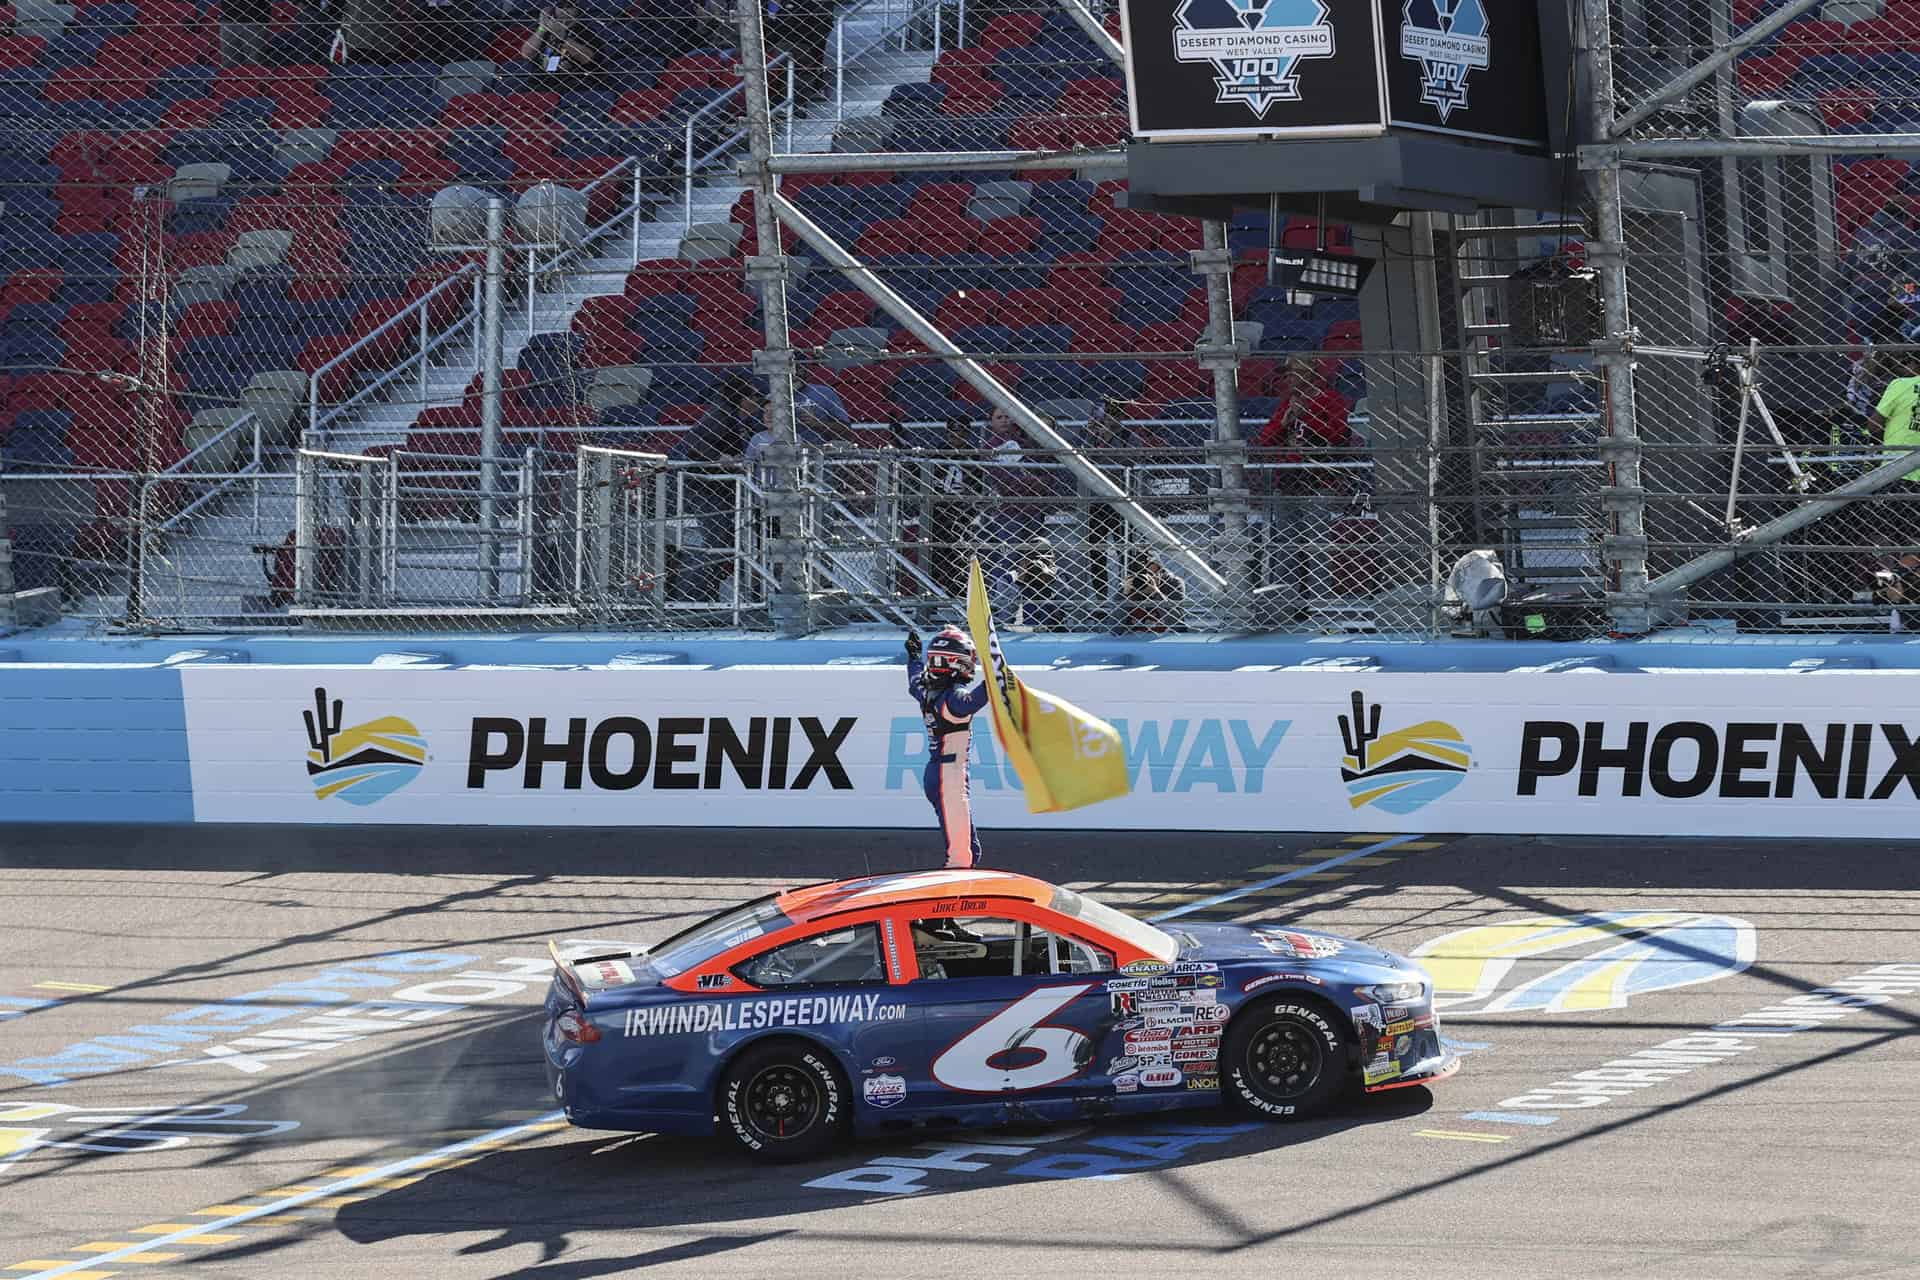 Jake drew waves the championship flag after winning the 2022 arca menards series west title. Photo by rachel schuoler / kickin the tires.